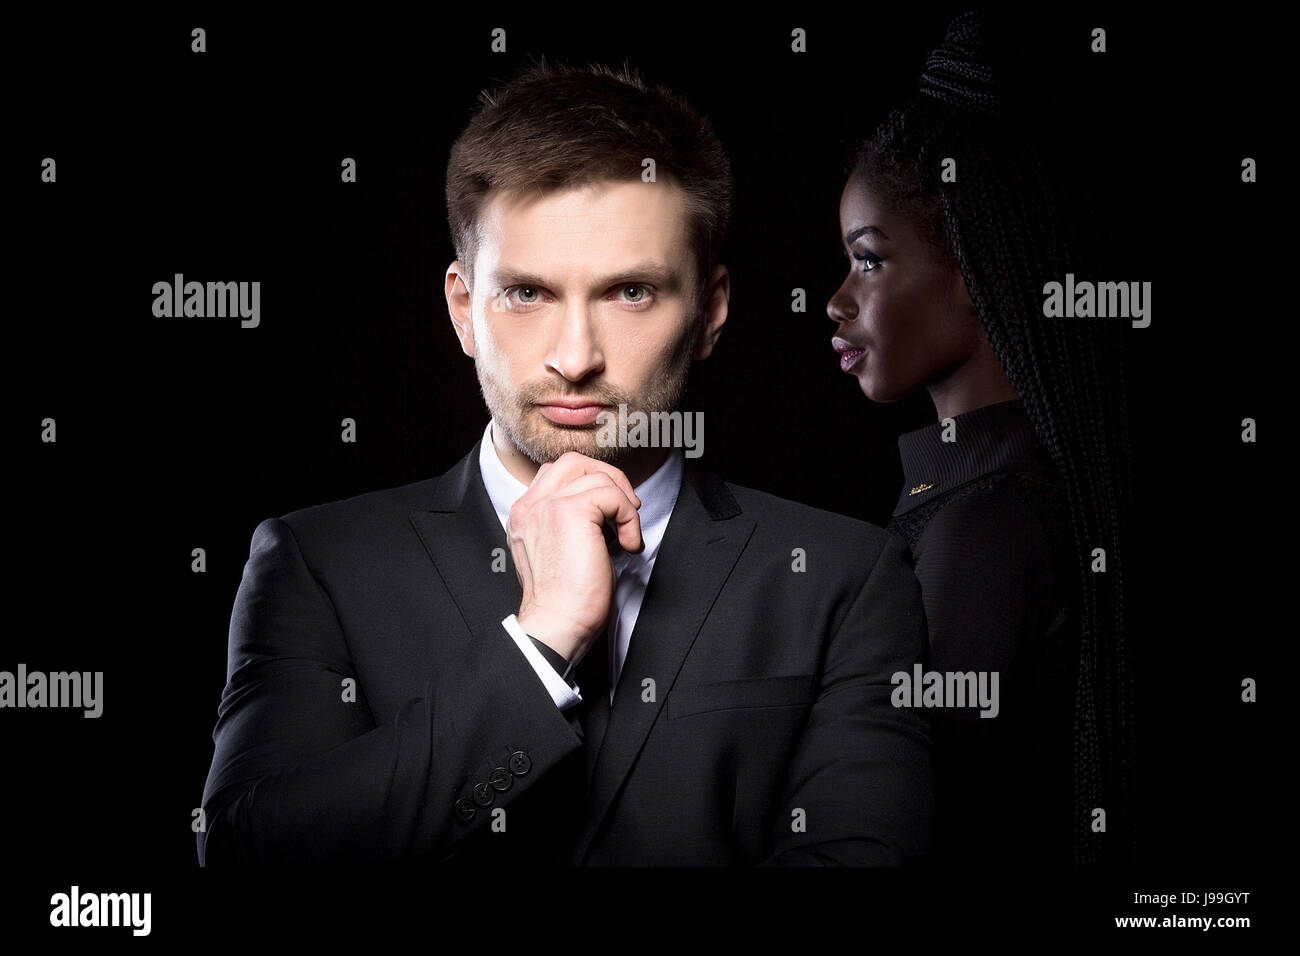 Man in suit standing with hand touching his chin with dark skinned woman behind. Stock Photo